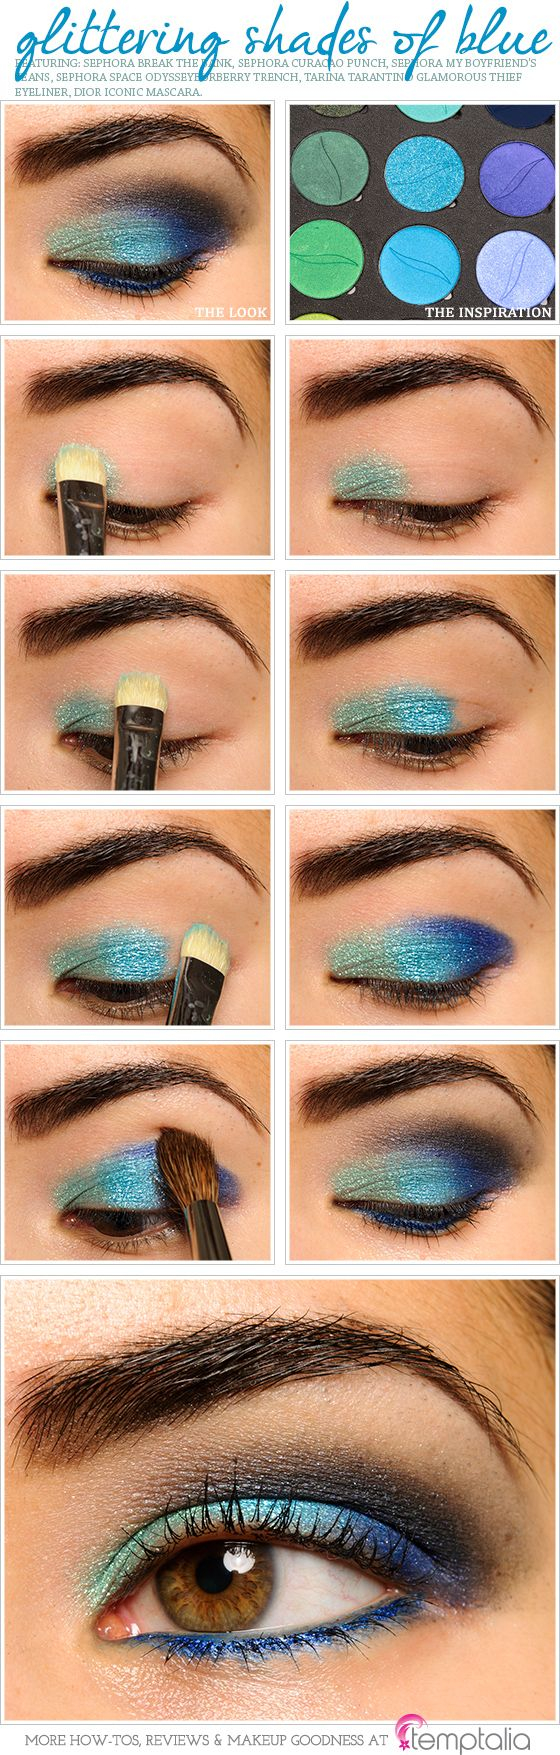 Blue Makeup For Brown Eyes 27 Pretty Makeup Tutorials For Brown Eyes Styles Weekly